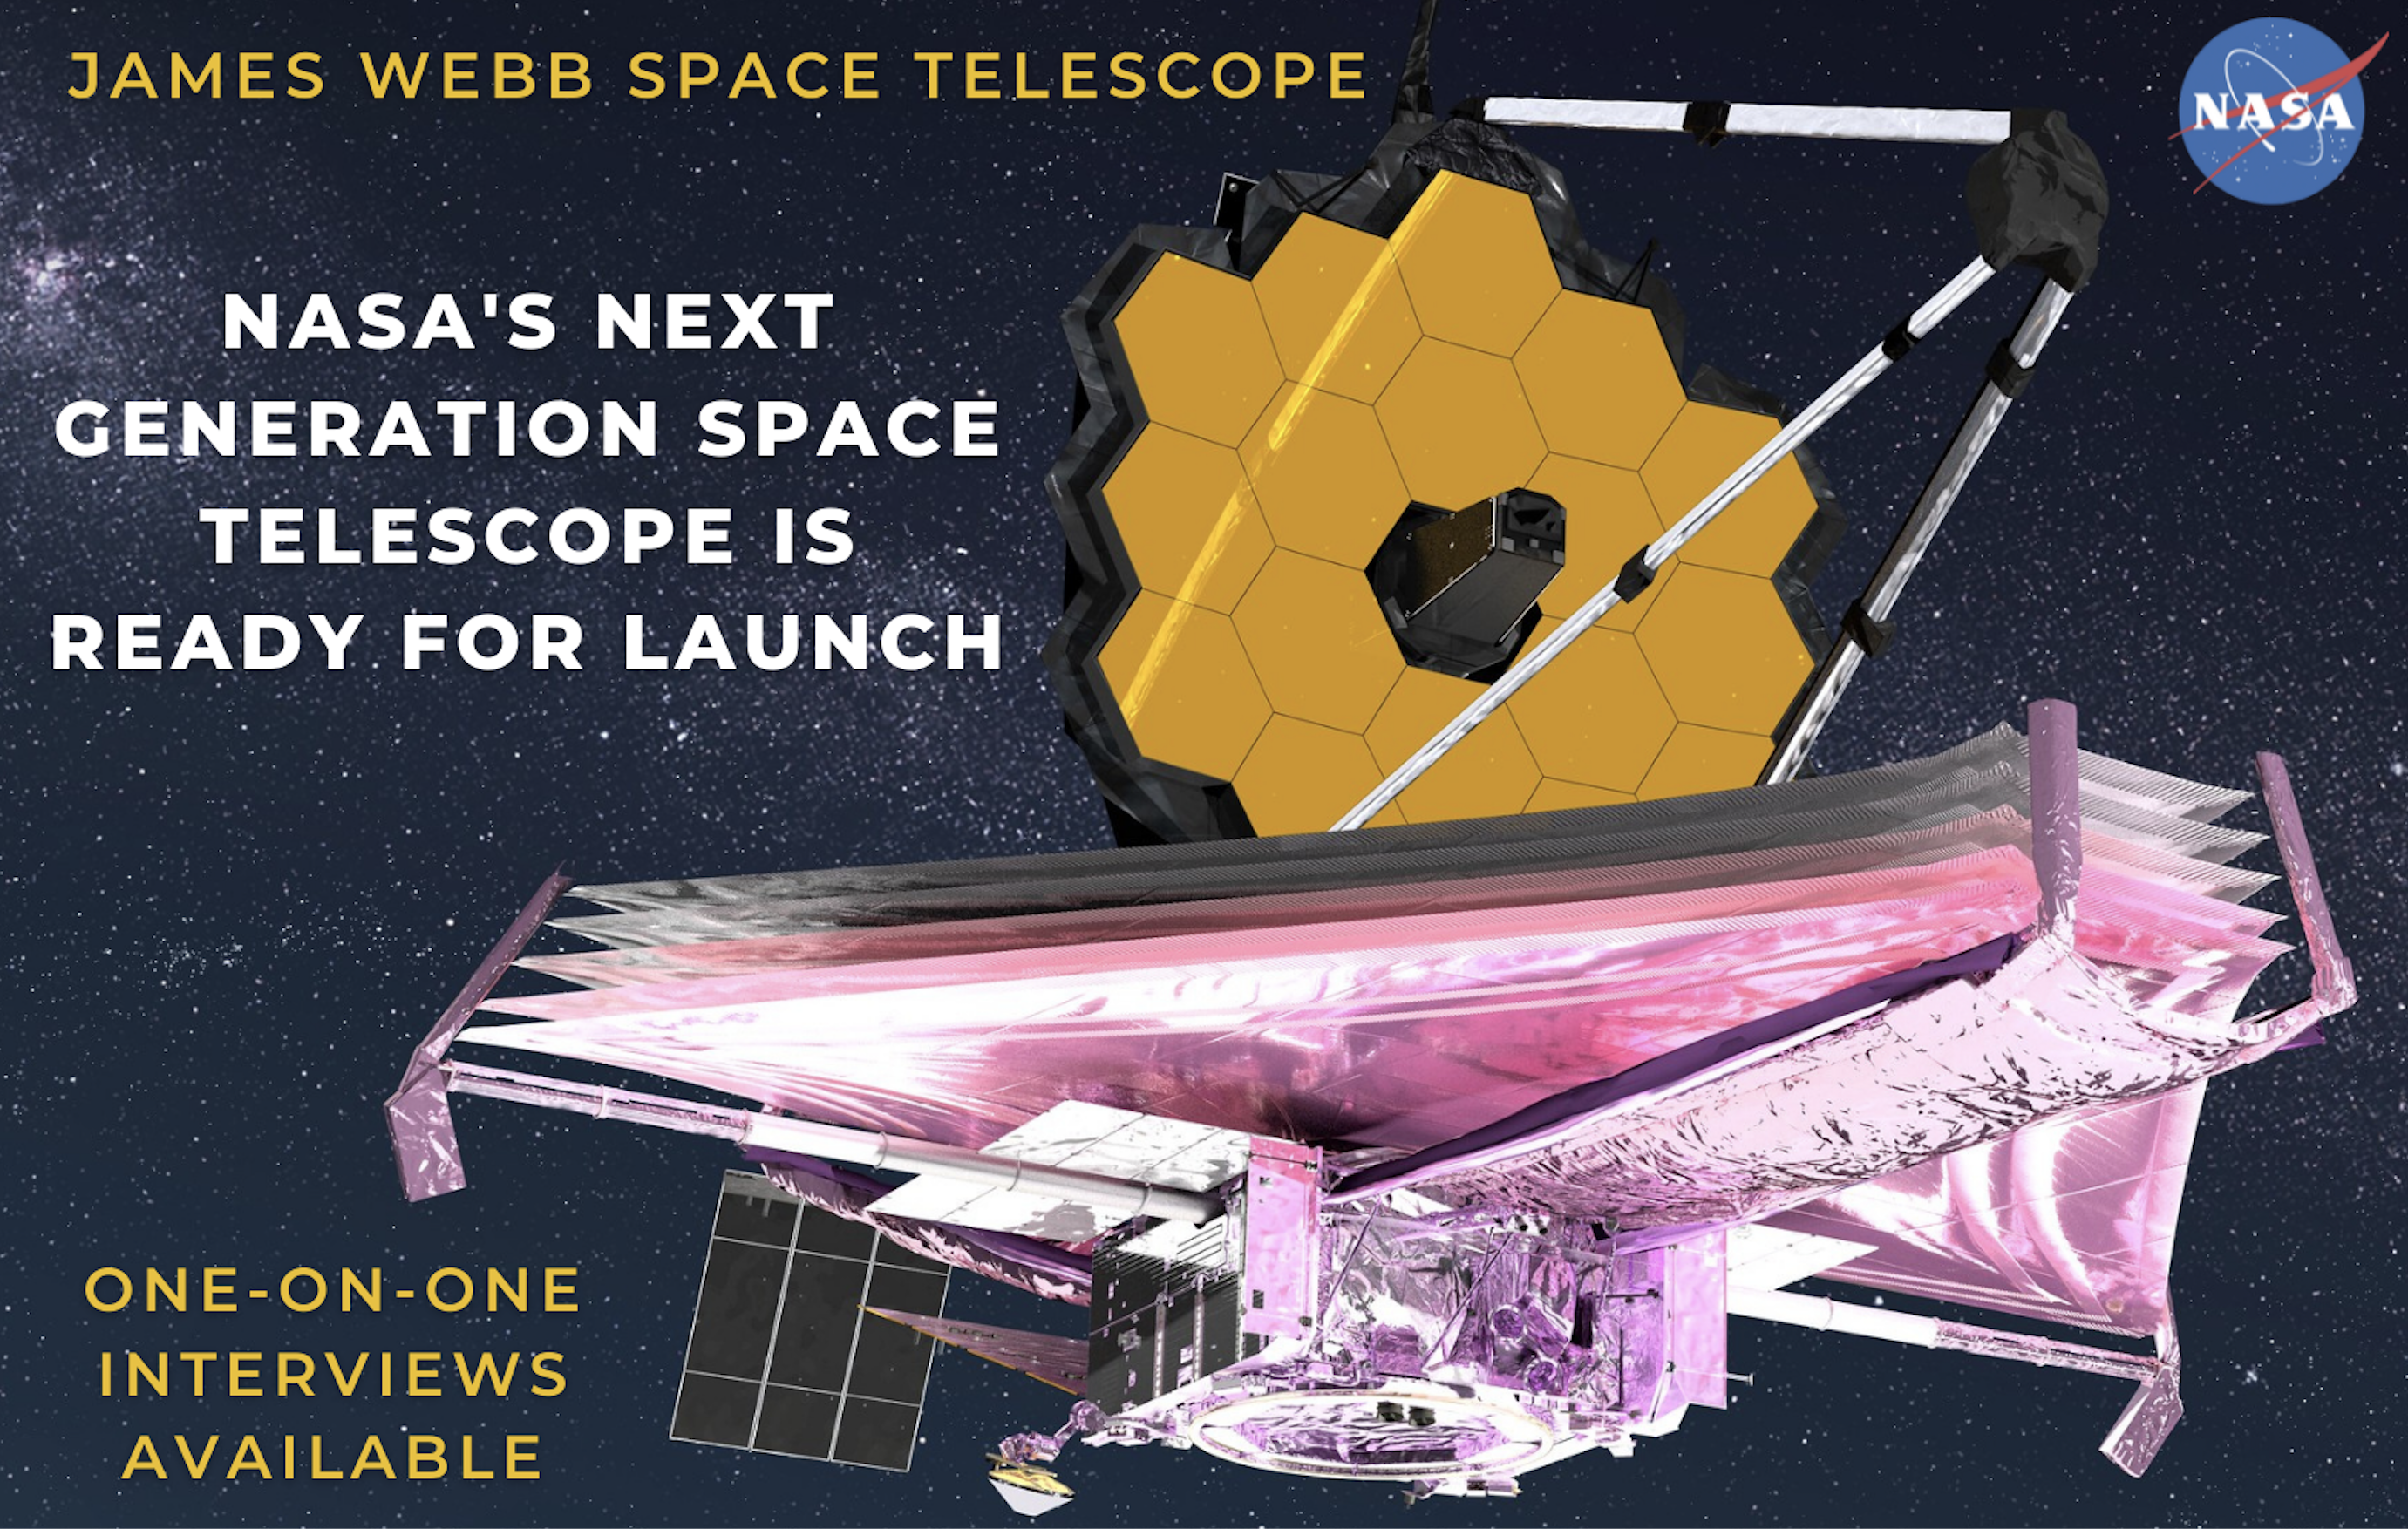 SVS - World's Biggest and Most Powerful Space Telescope Launches Dec 25  Live Shots